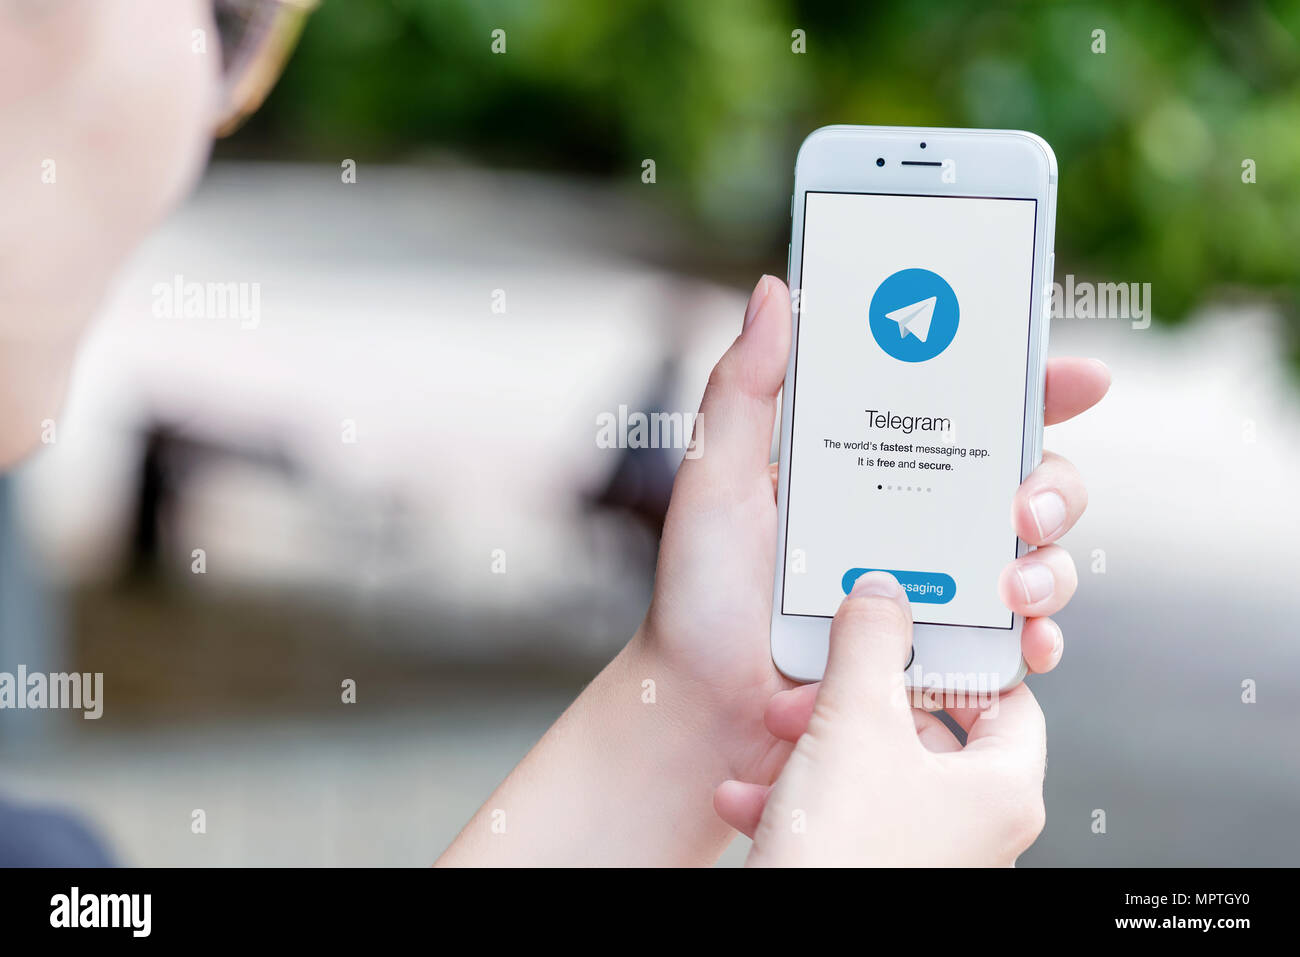 Telegram messenger on Apple iPhone in female hands over the shoulder view. Stock Photo